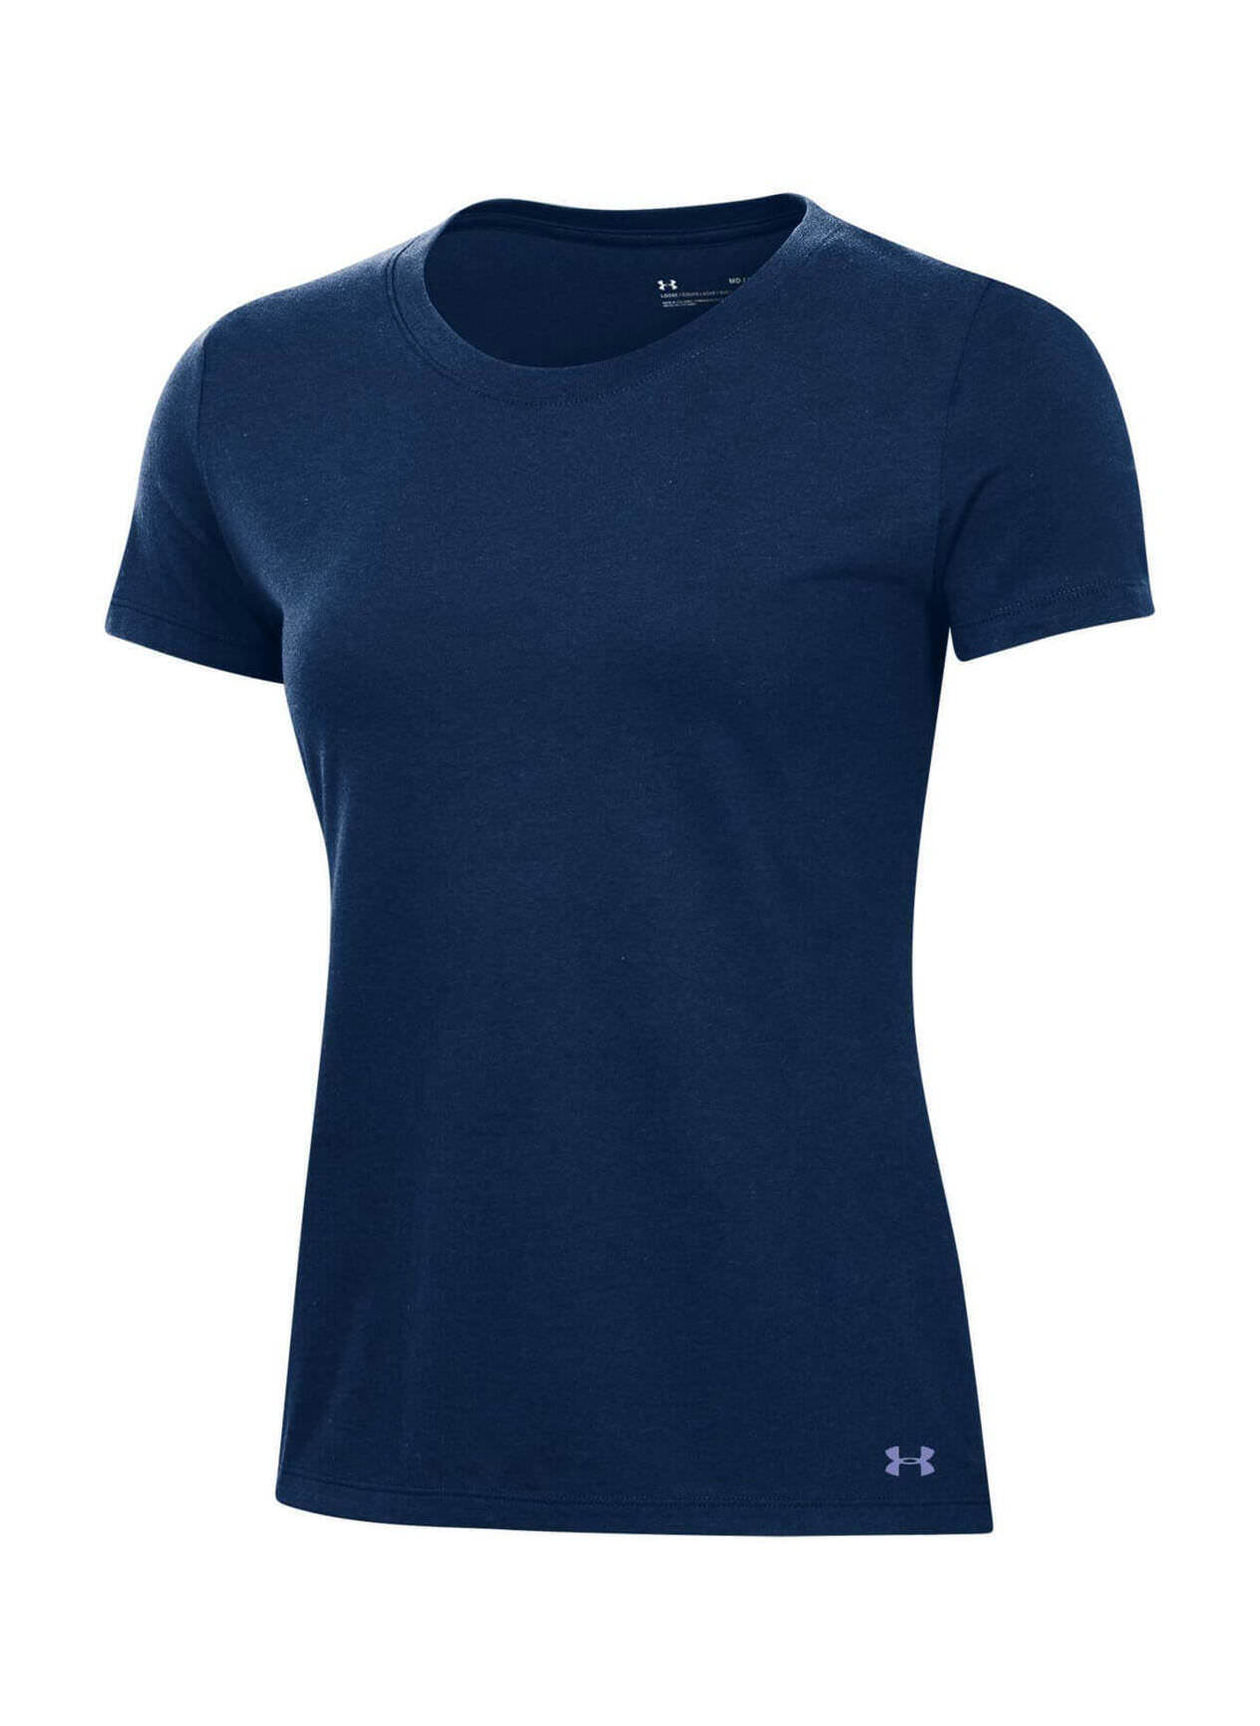 12ct. Custom Under Armour Women's Cotton T-Shirt by Corporate Gear